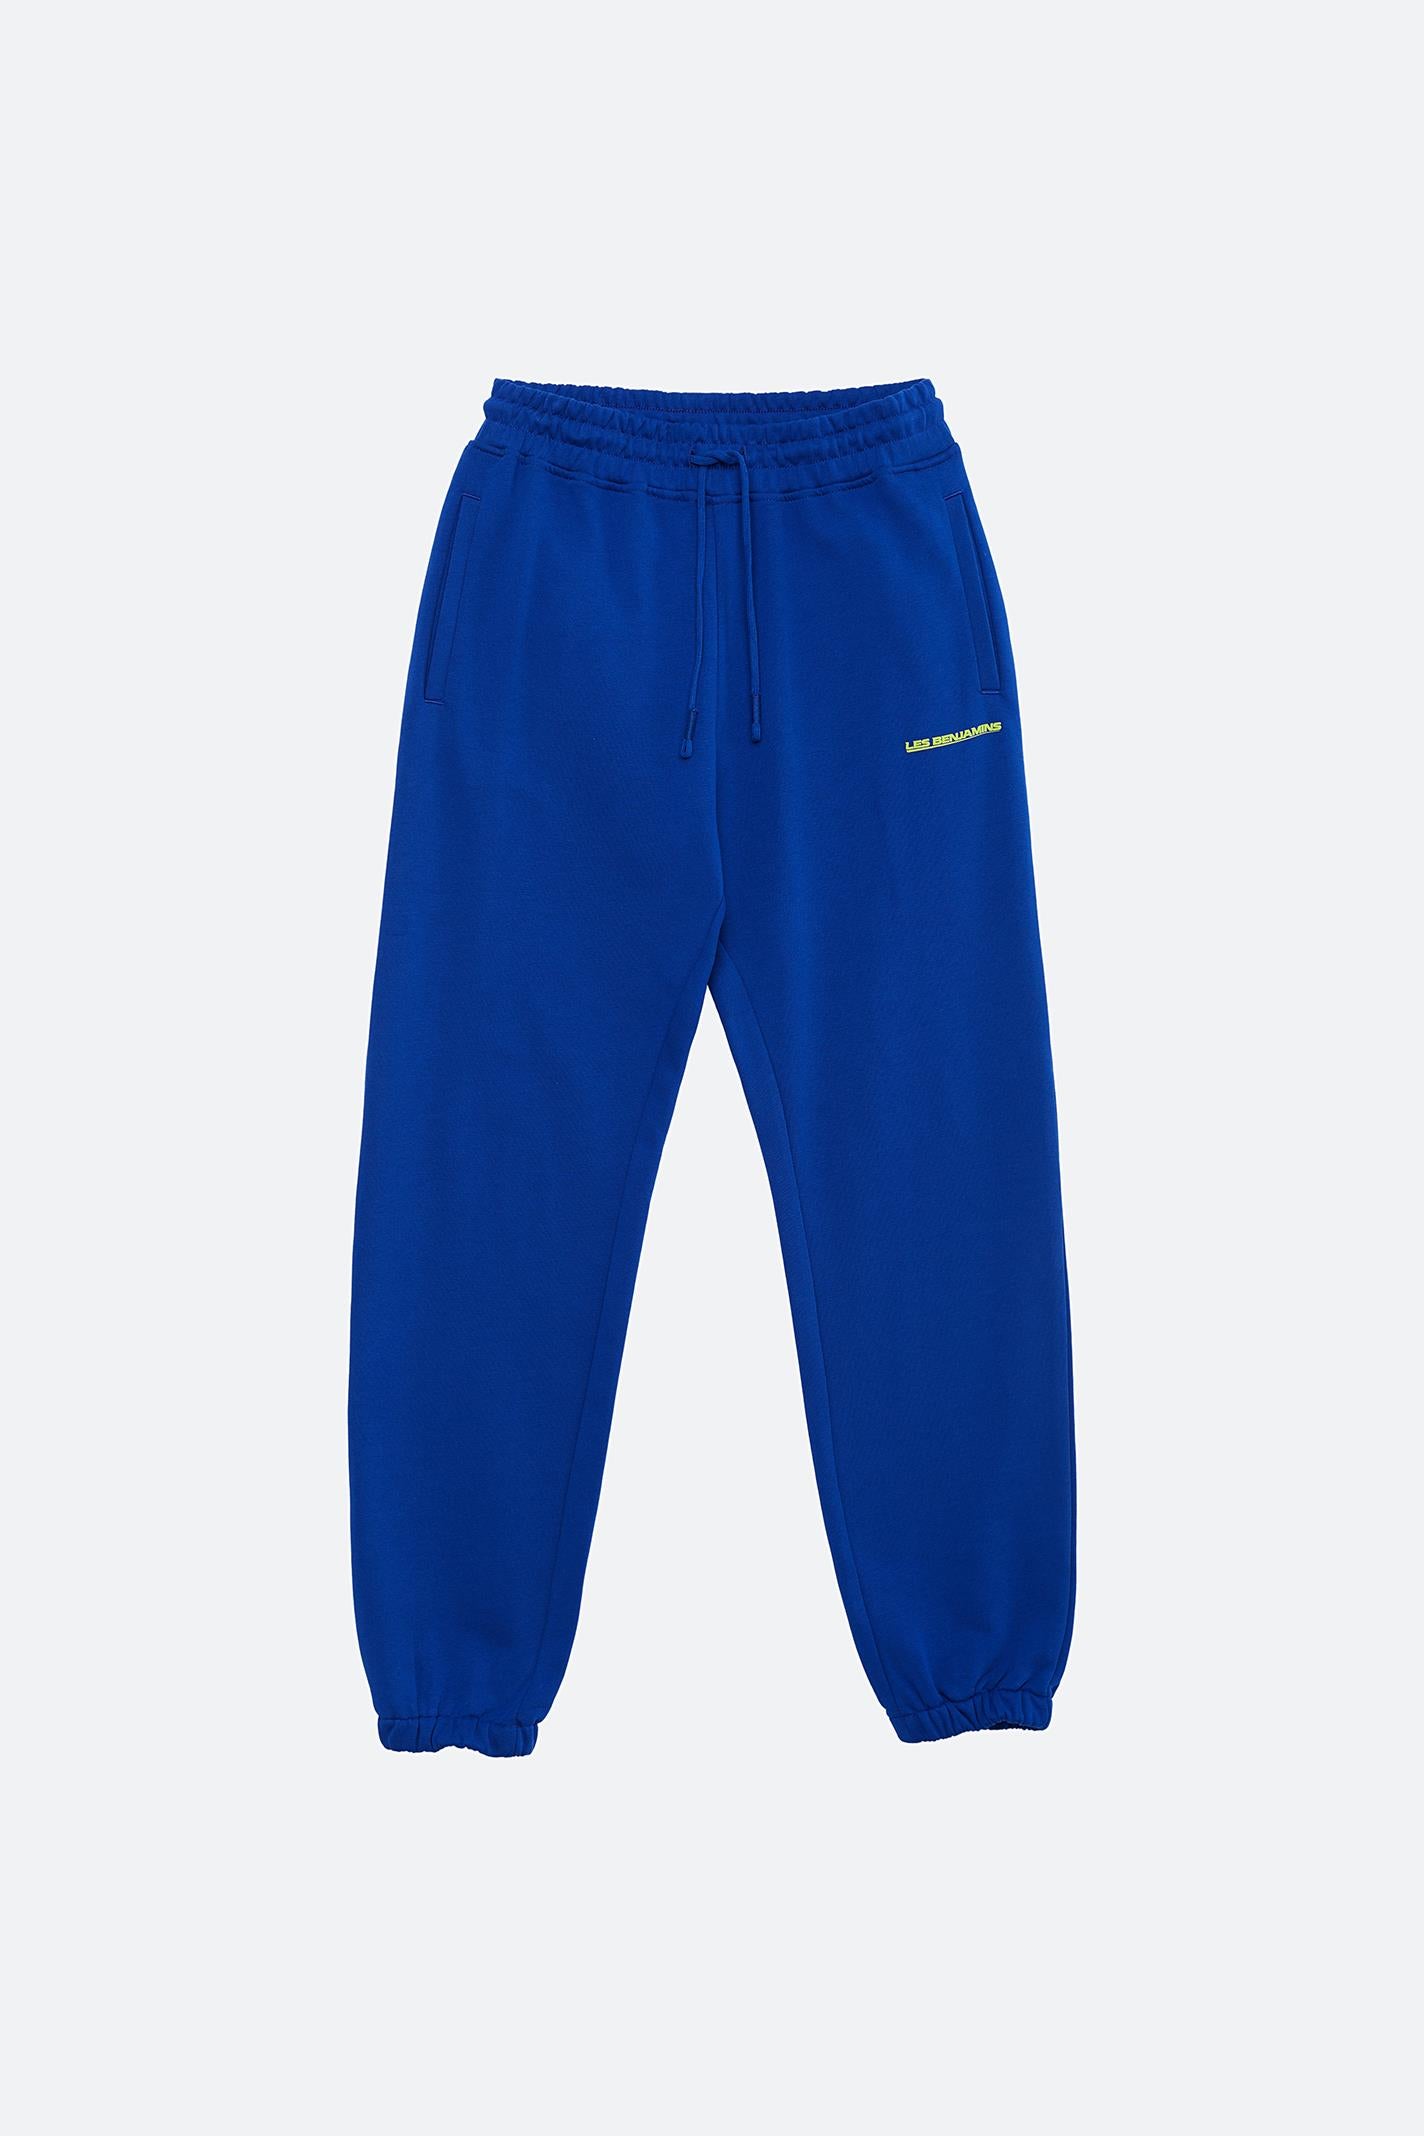 RELAXED SWEATPANT 001 